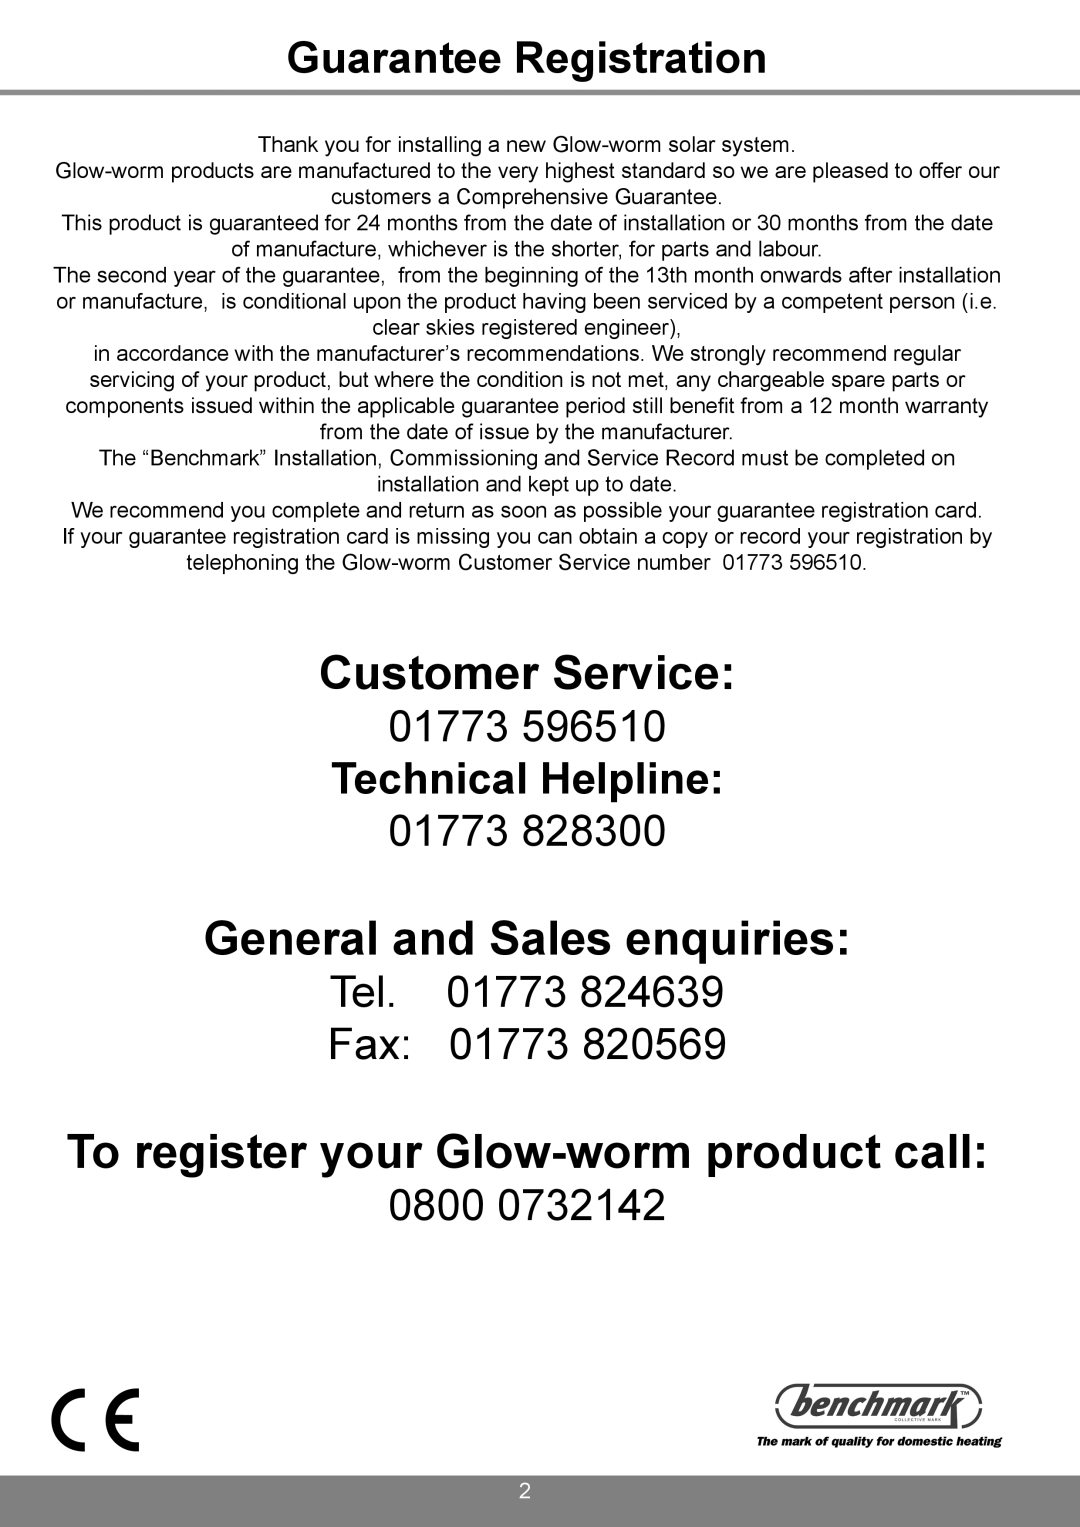 Glowworm Lighting 200 I Customer Service, General and Sales enquiries, To register your Glow-wormproduct call, 01773, 0800 